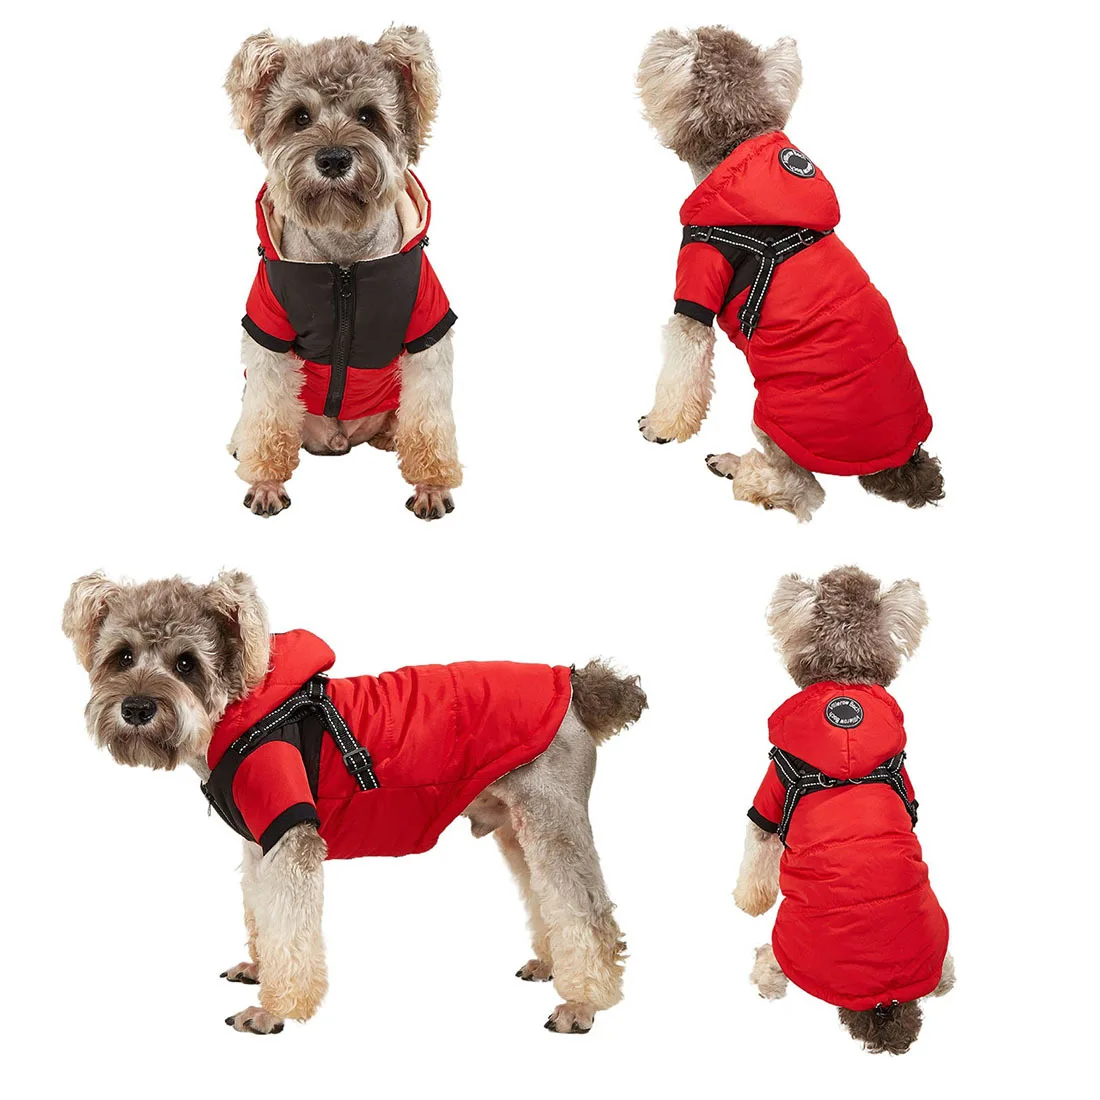 

New Arrival Pets Teddy Clothes Autumn Winter Waterproof Warm Pet Down Jacket, Red/grey/pink